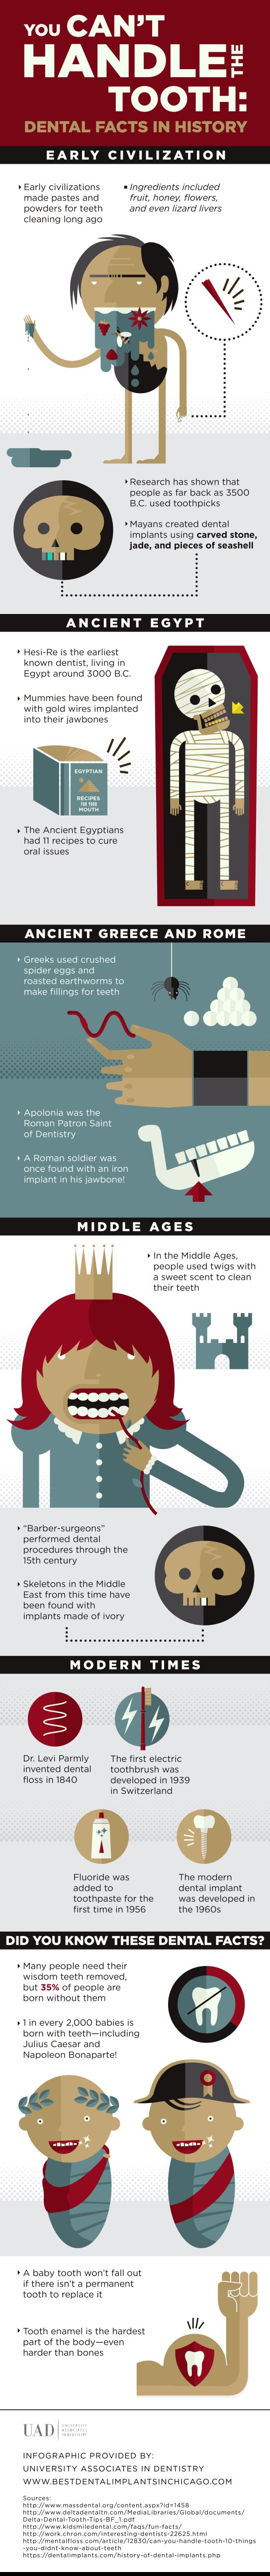 You Can’t Handle the Tooth: Dental Facts in History Infographic